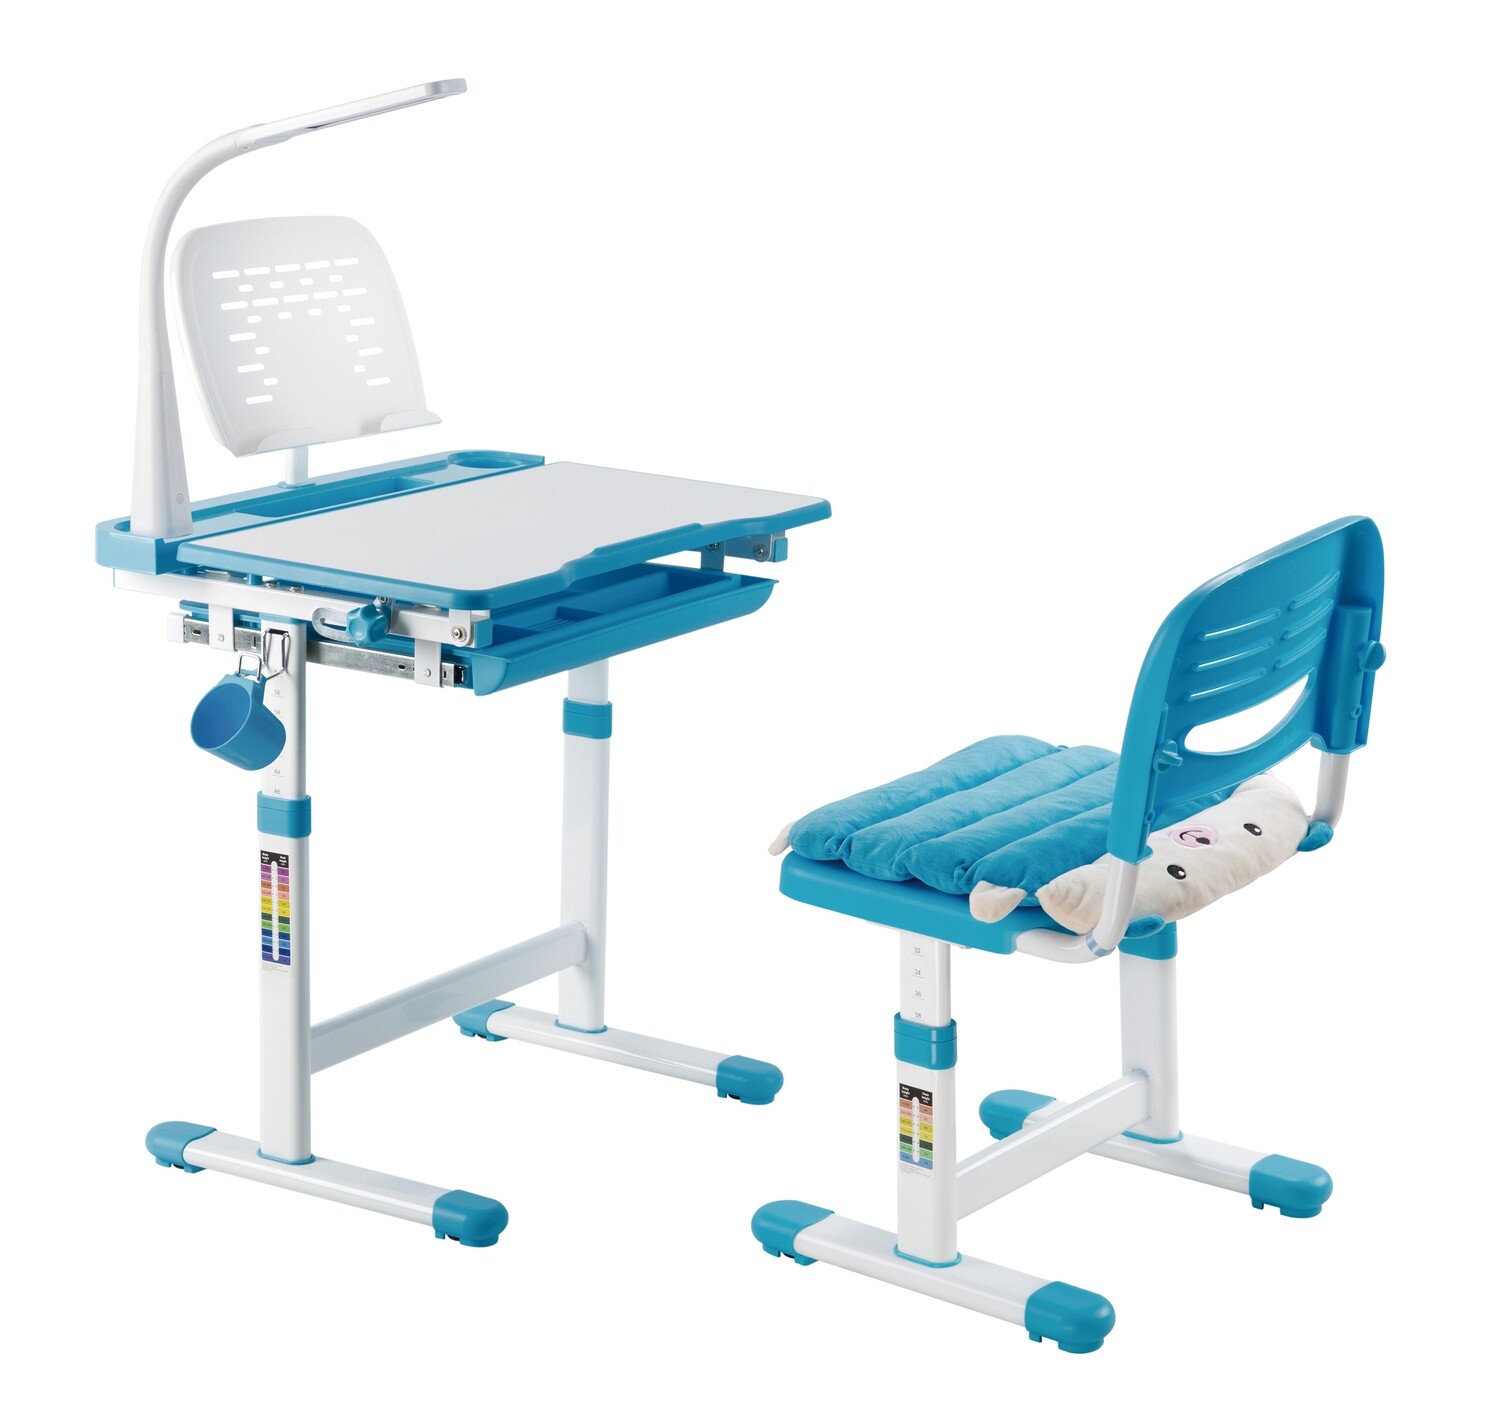 KIDOMATE Compact Lite Study Table and Chair Set - Blue